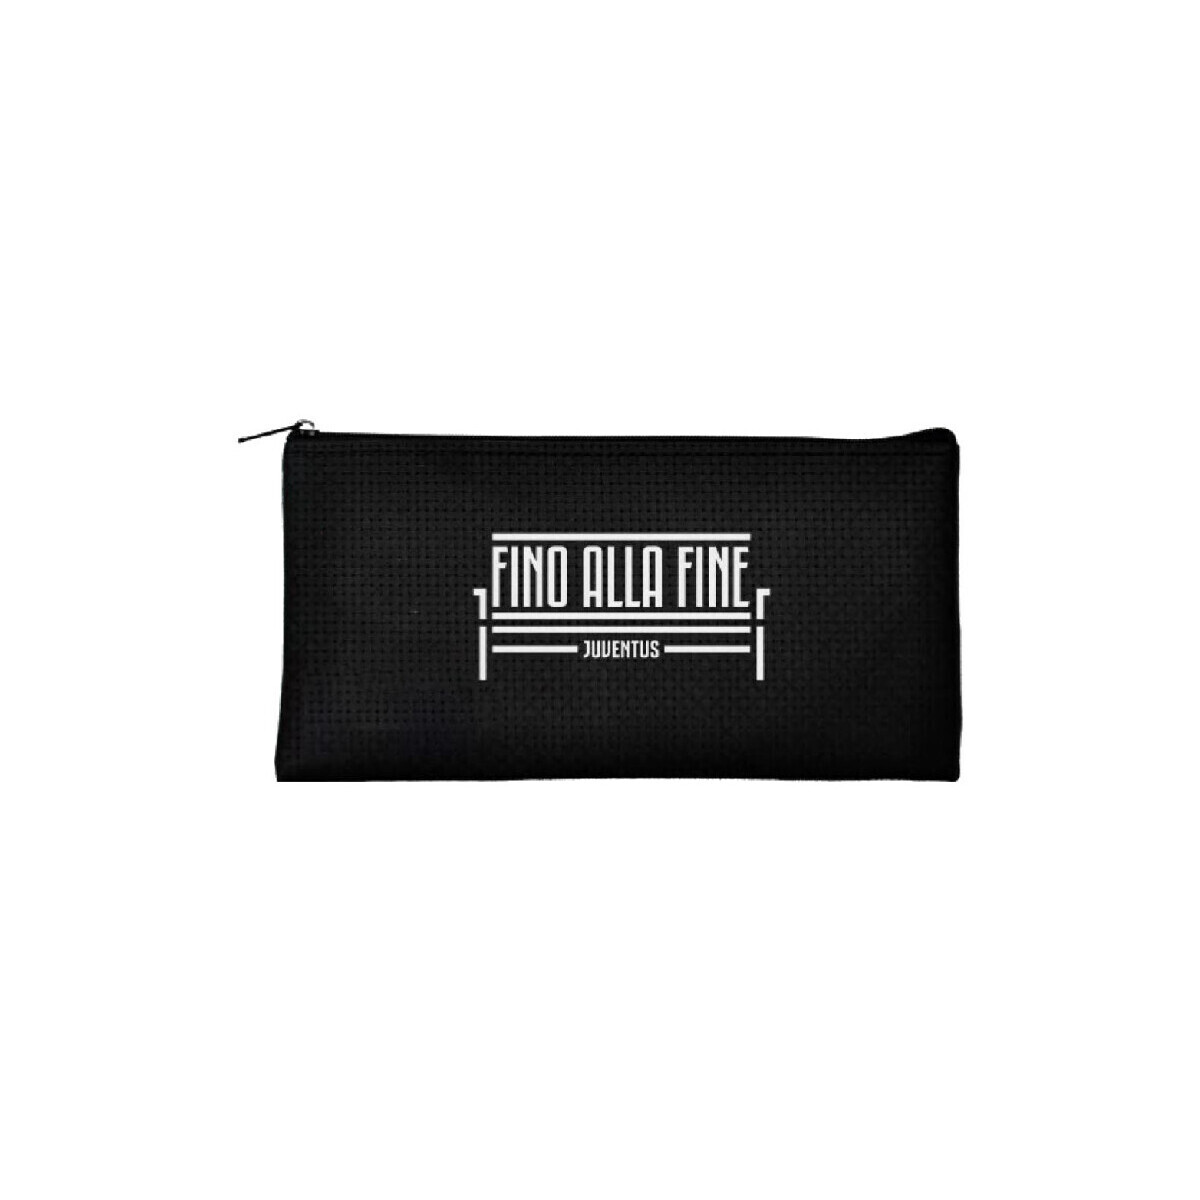 Sacs Pochettes / Sacoches Official Product JUFI05 Noir